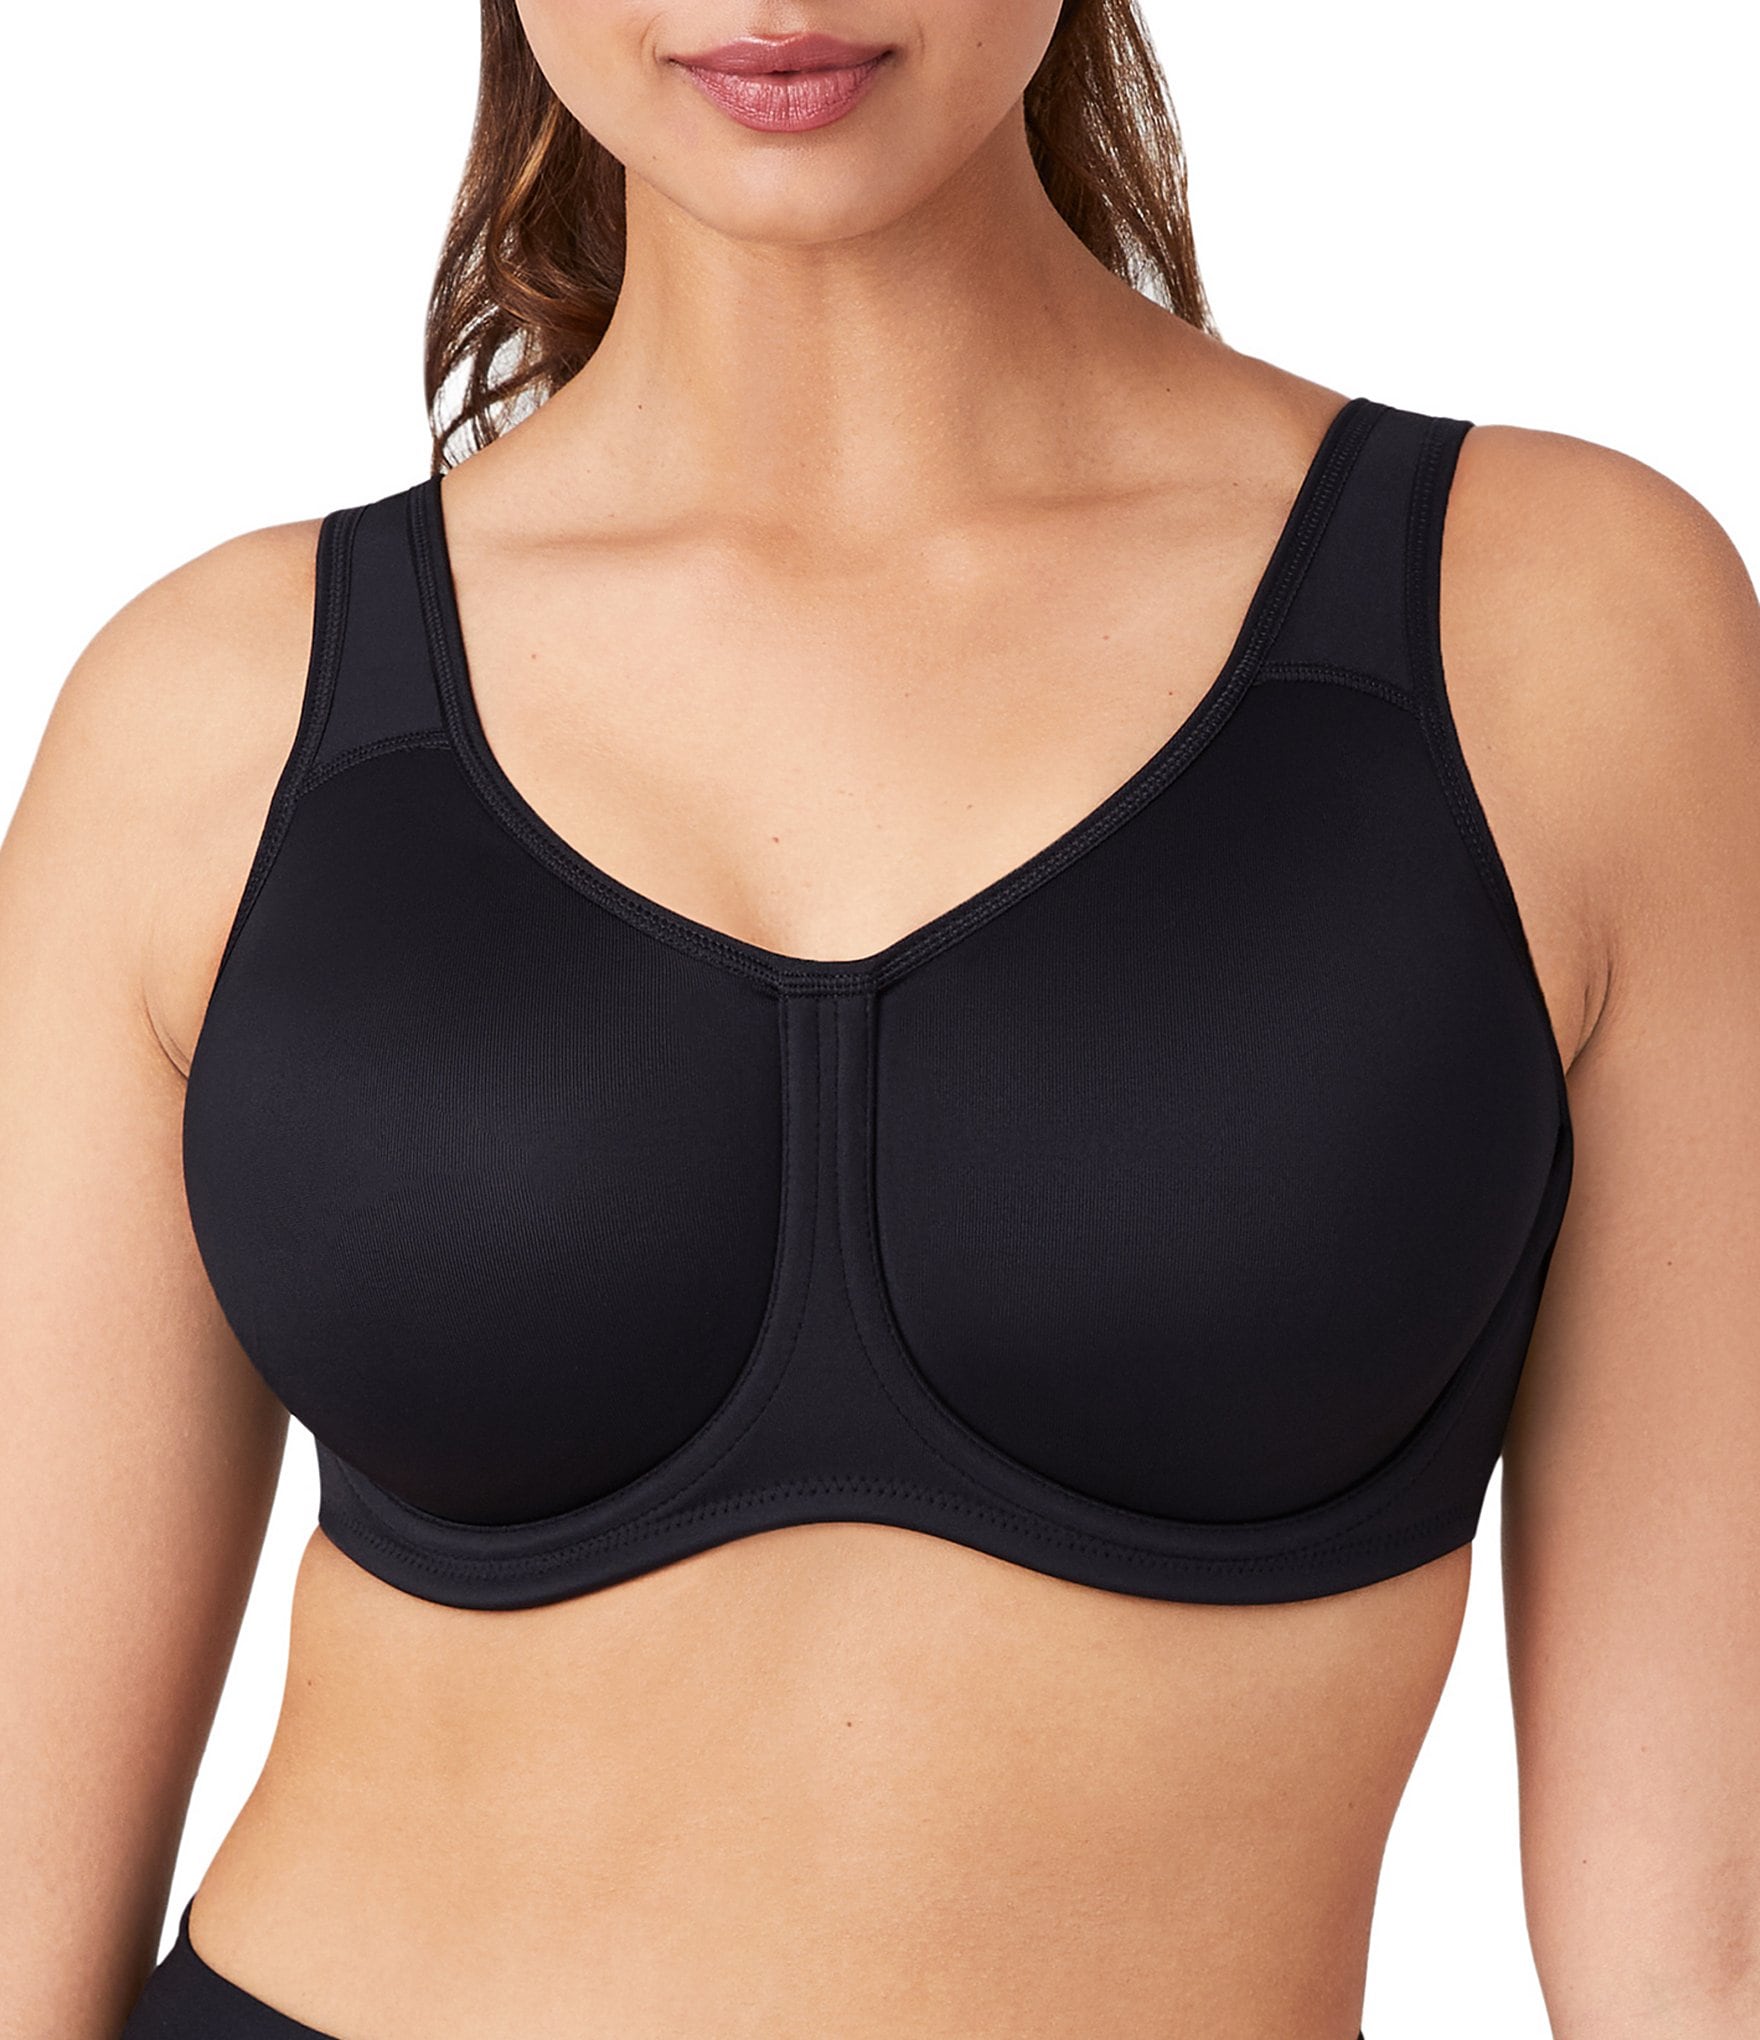 Choosing the Best Sport Bra for Your Workout - Wacoal